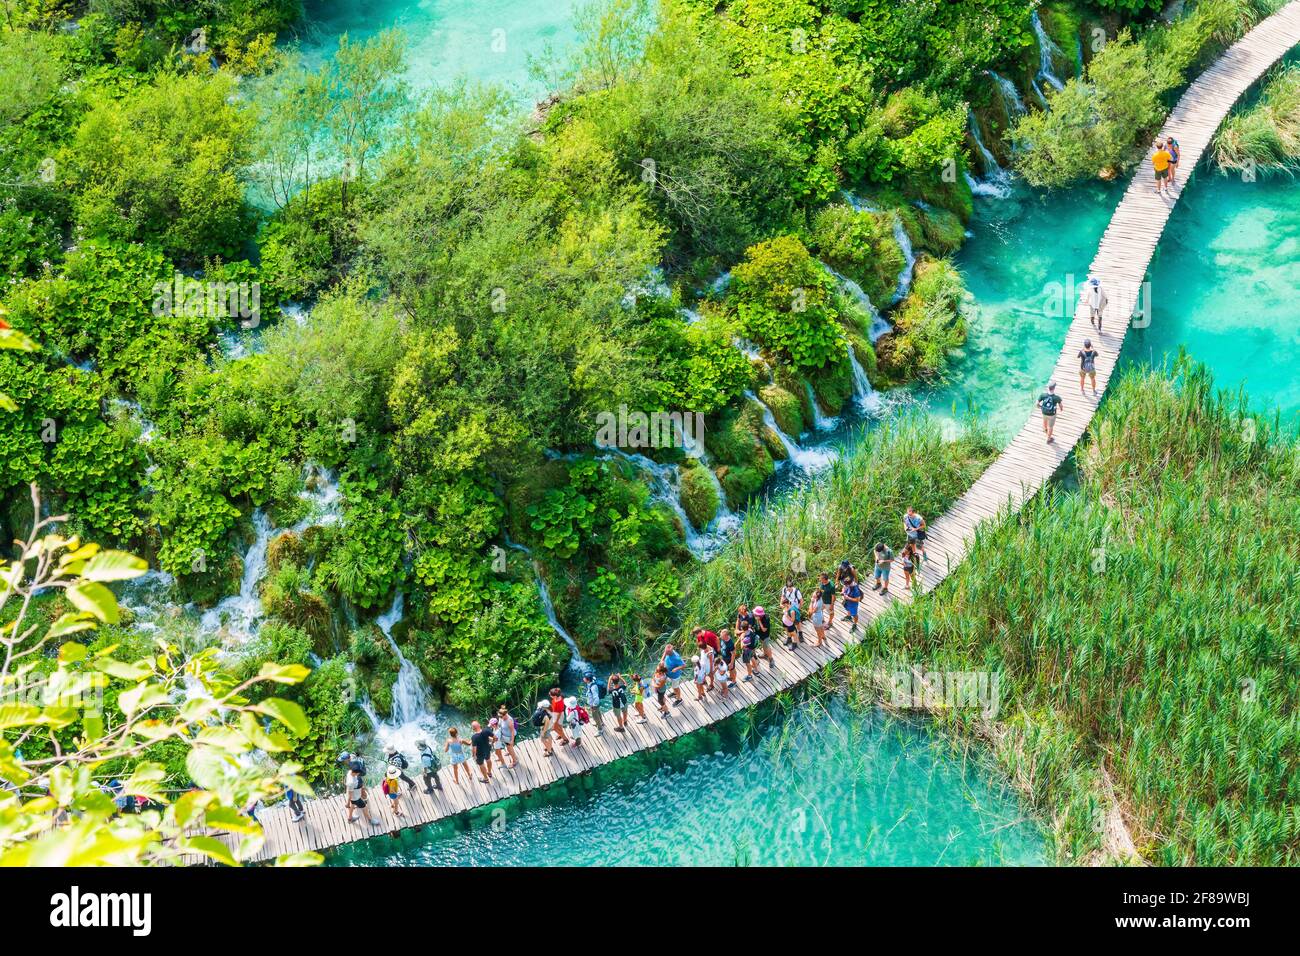 Plitvice lakes, Croatia. Waterfalls and wooden pathway of Plitvice Lakes National Park. Stock Photo